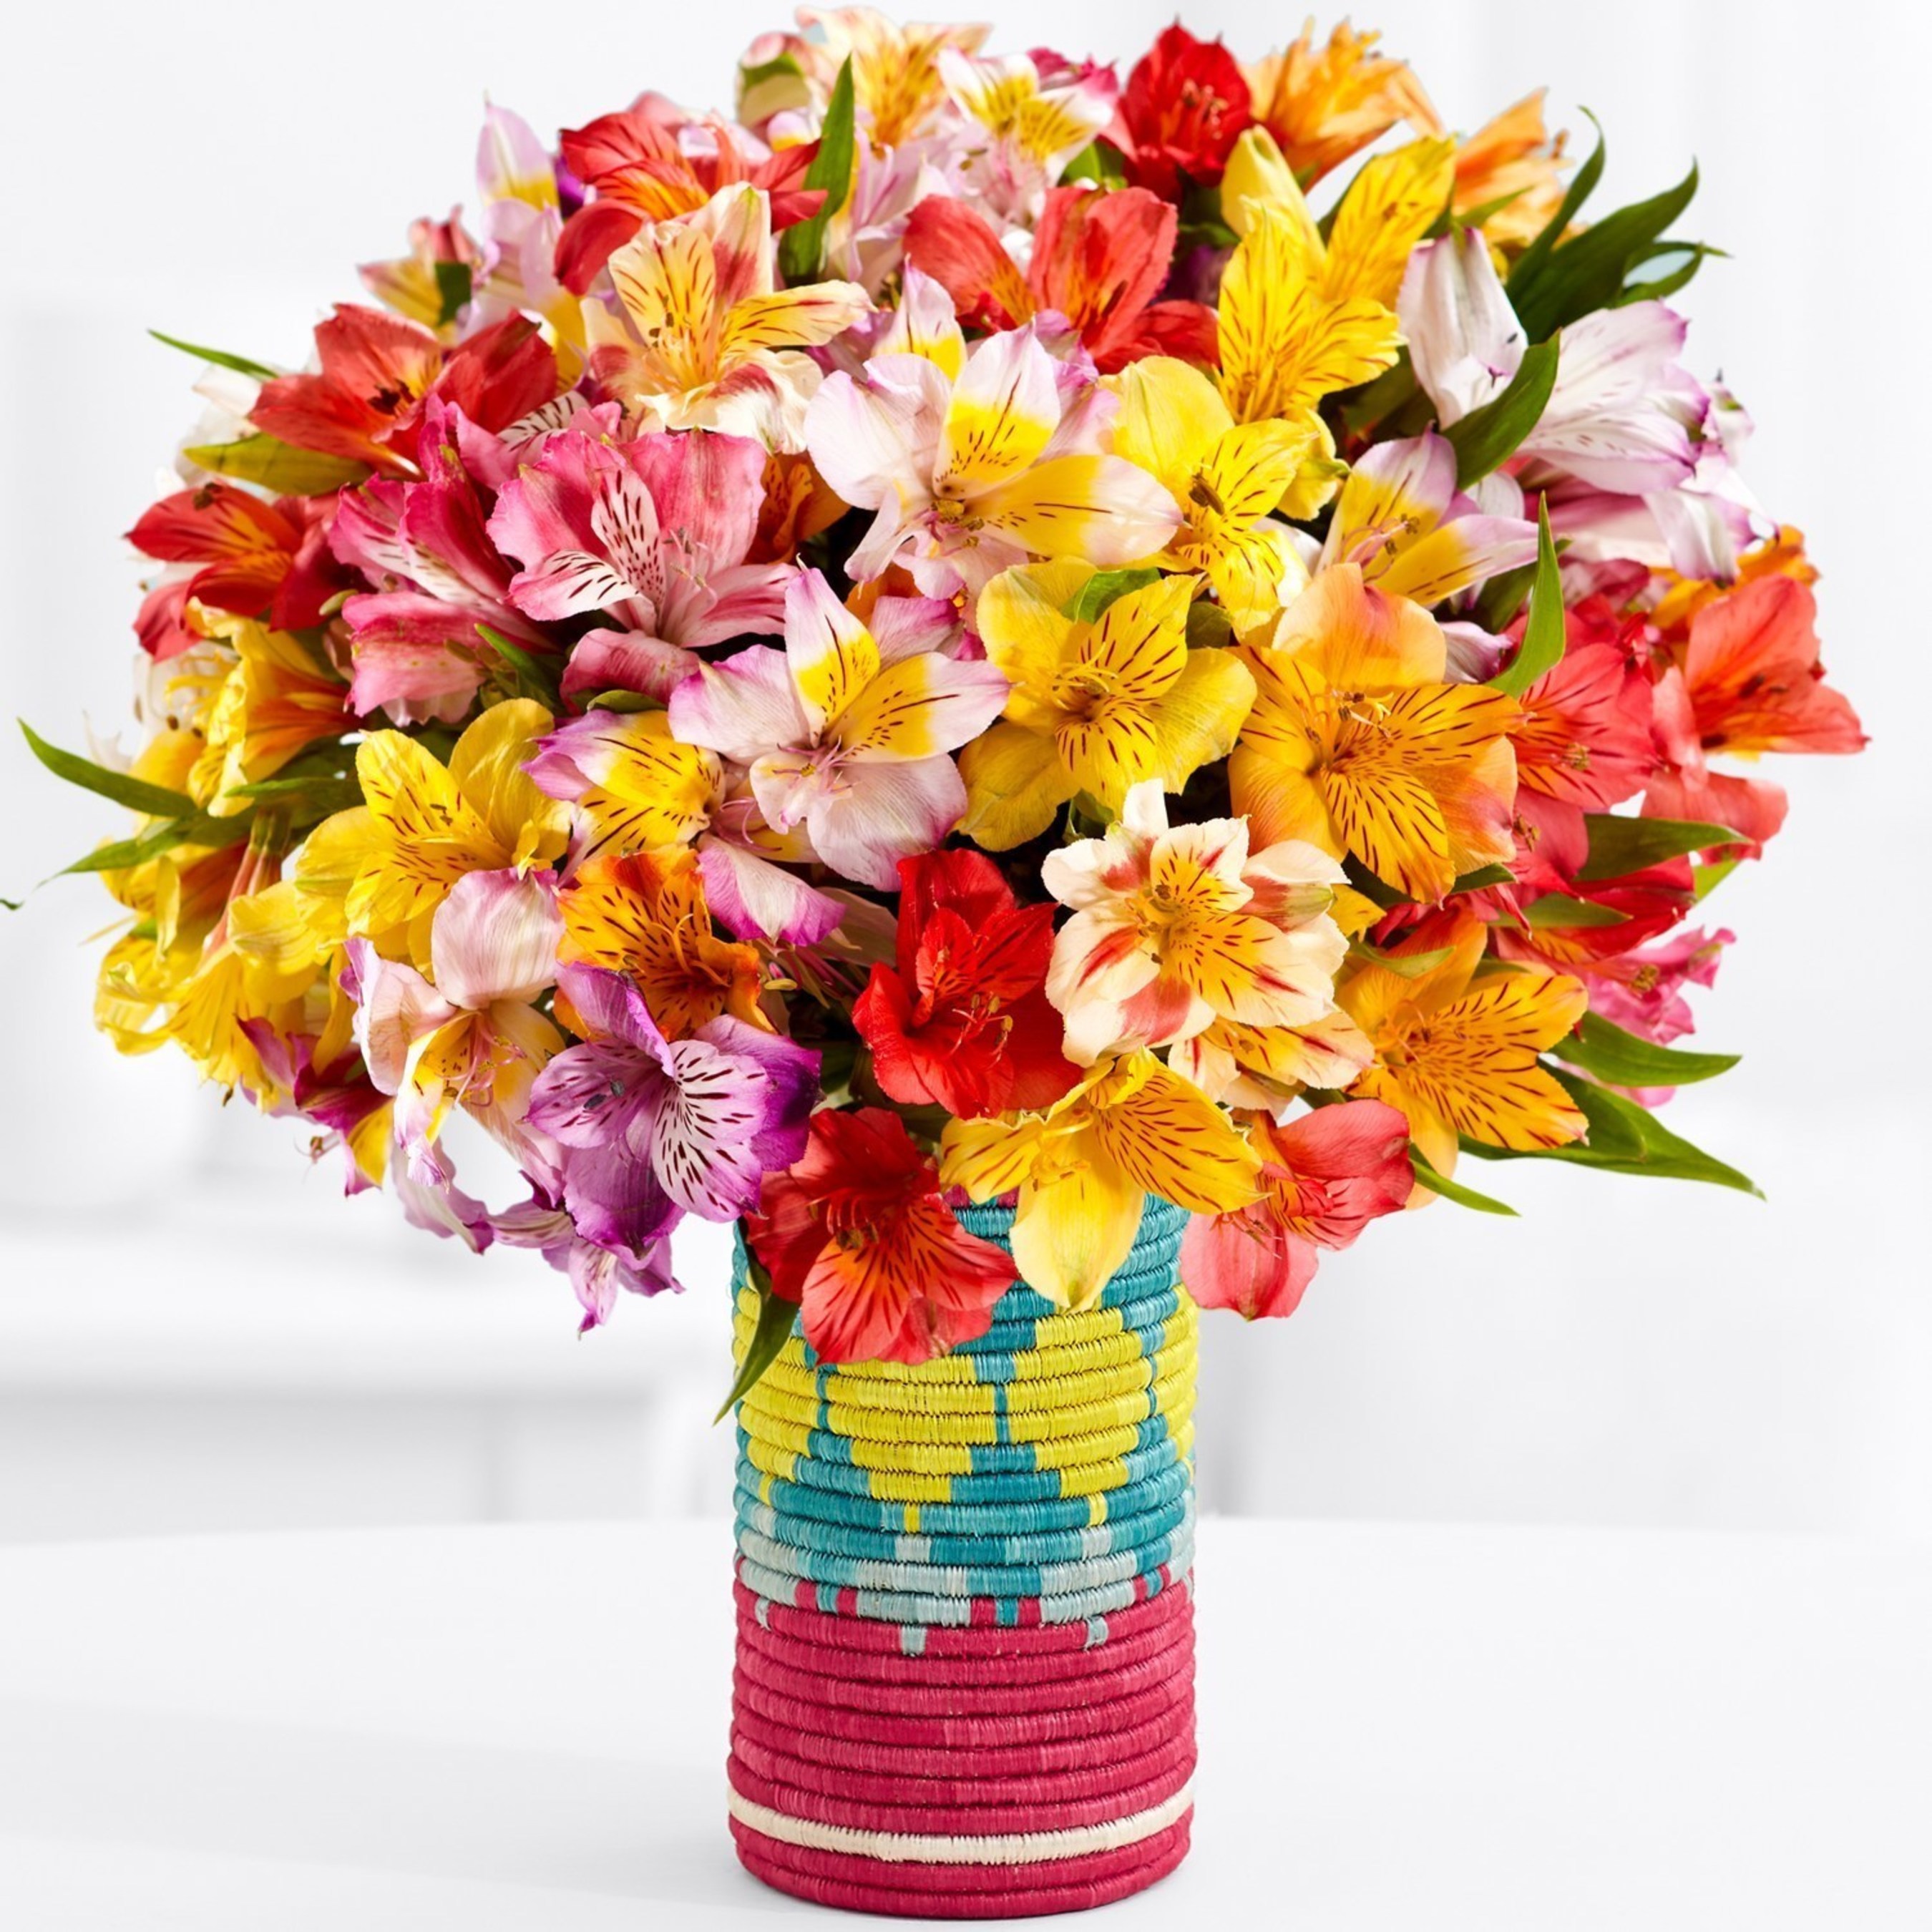 The ProFlowers All Across Africa collection for Mother's Day features exclusive vases handmade by African Artisans.